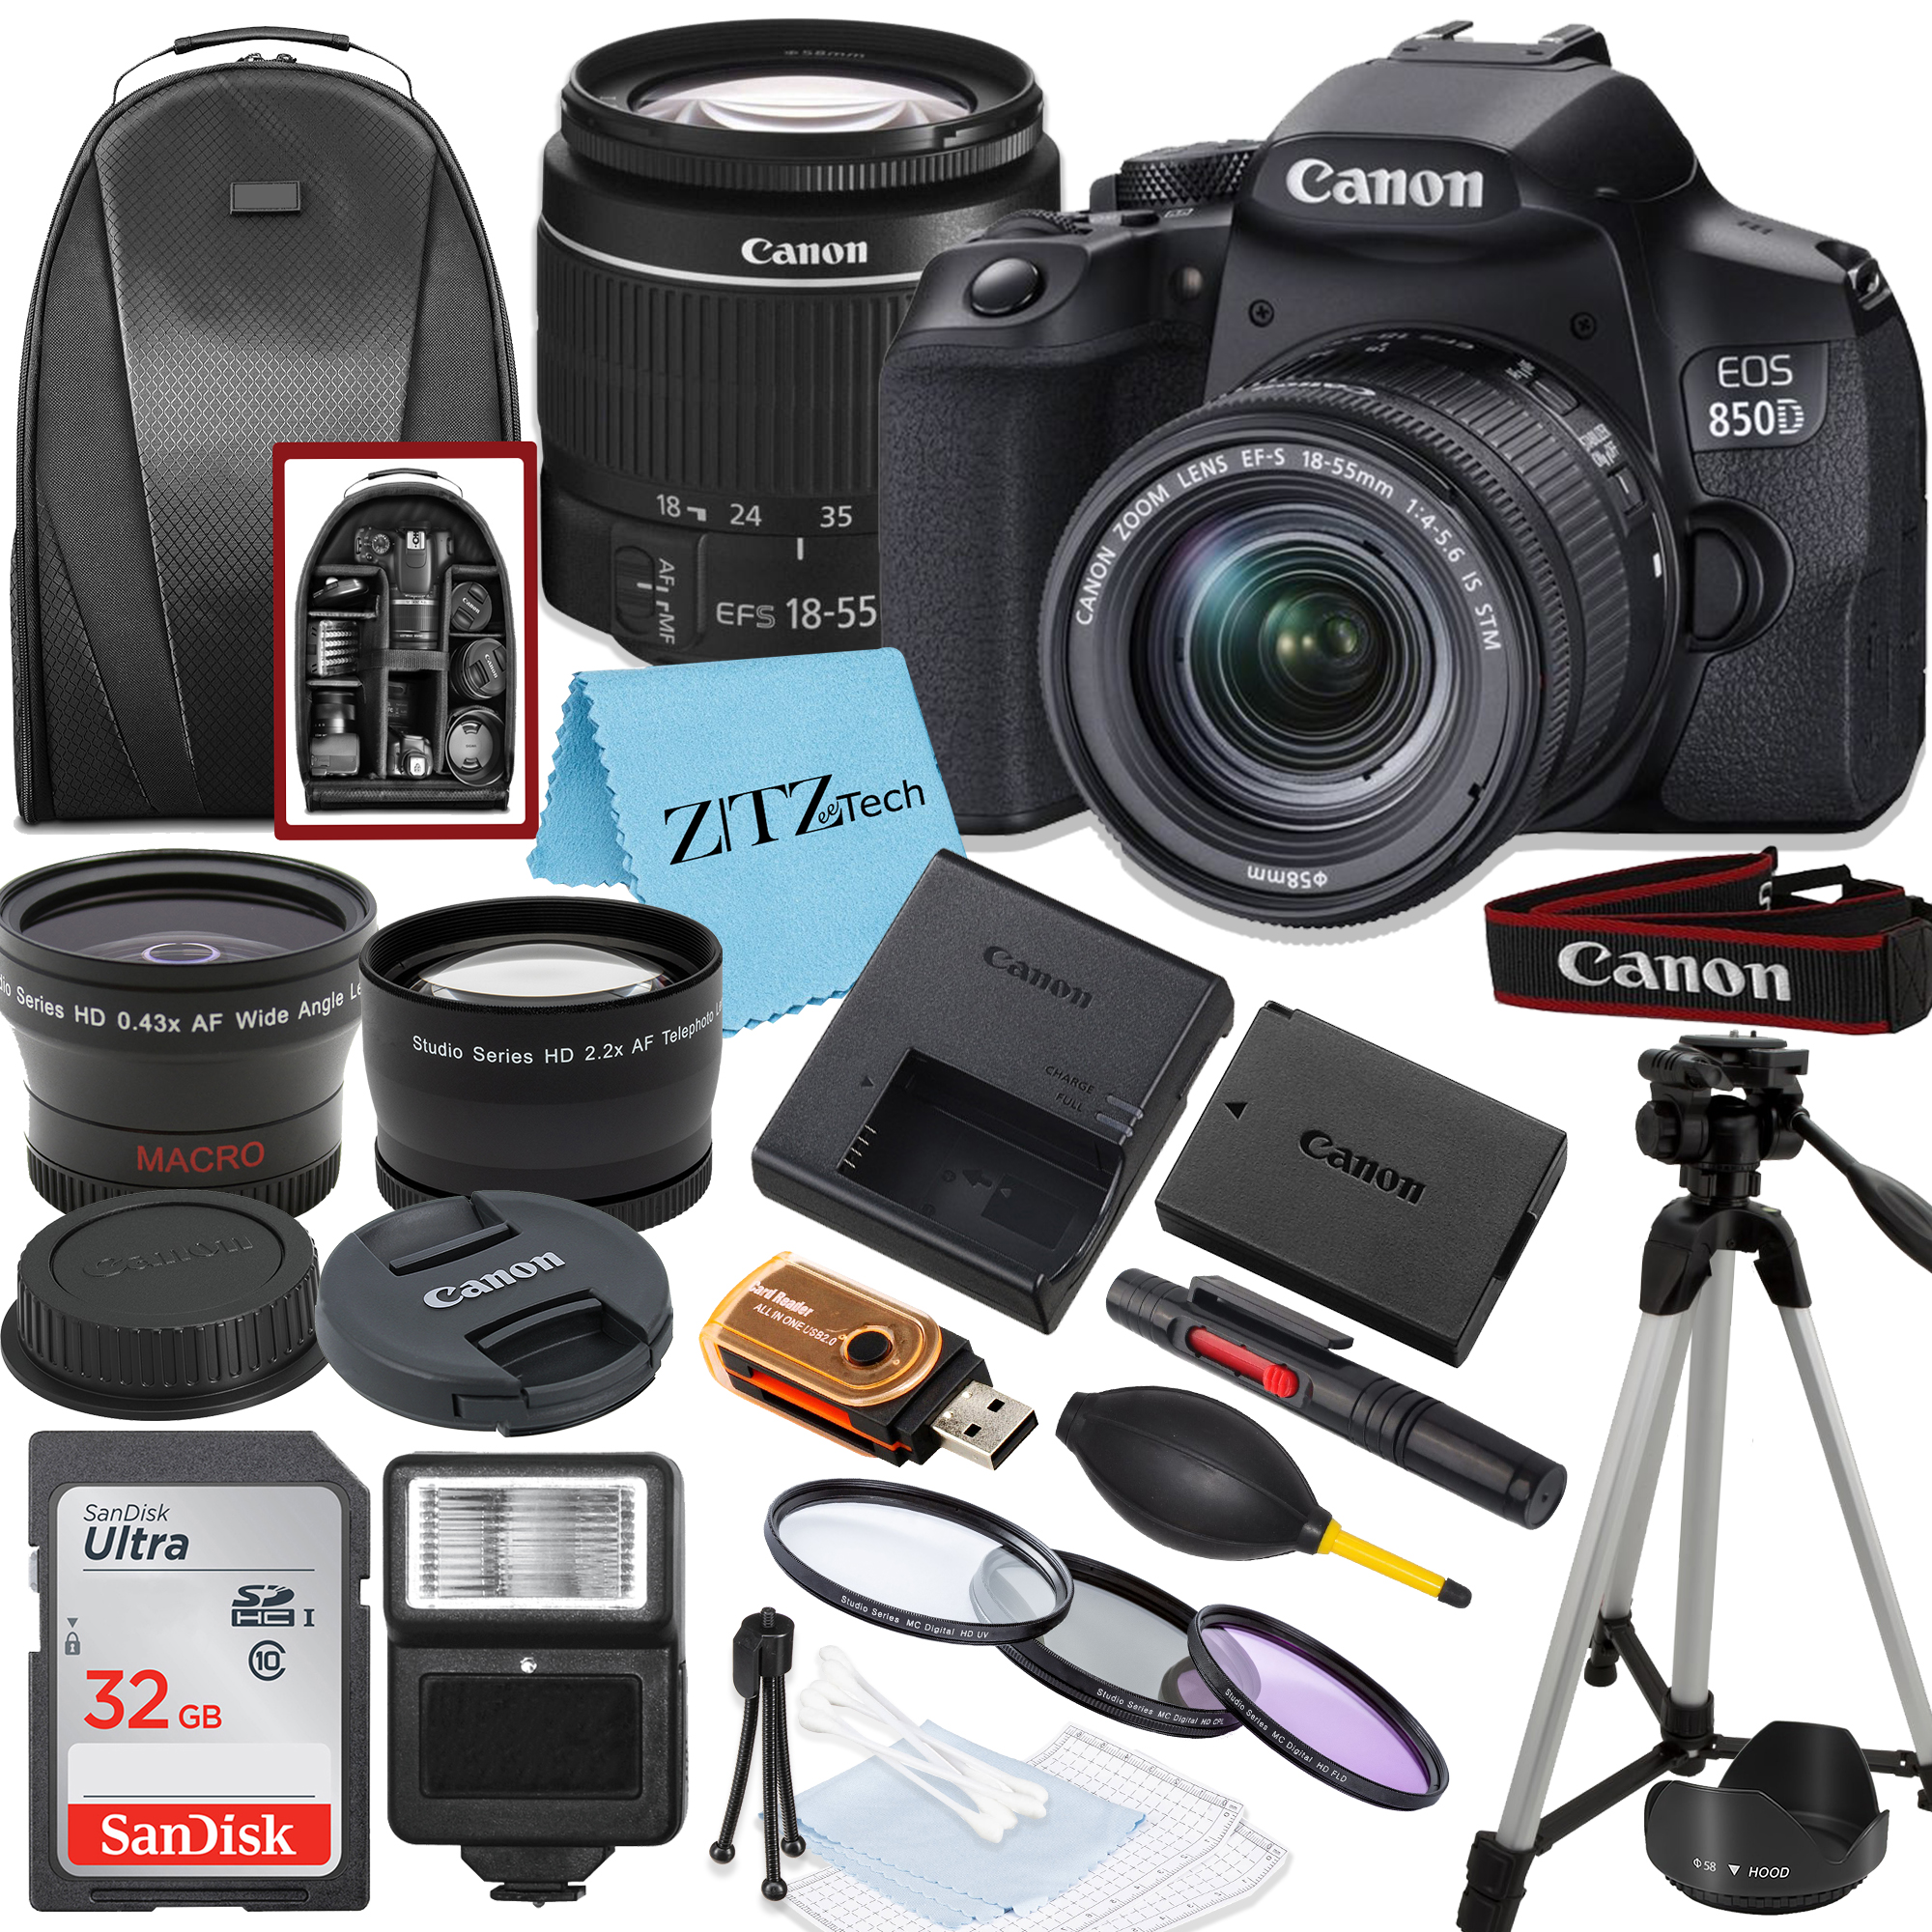 Canon EOS 850D / Rebel T8i DSLR Camera with 18-55mm Lens, SanDisk 32GB Memory, Tripod, Backpack and ZeeTech Bundle